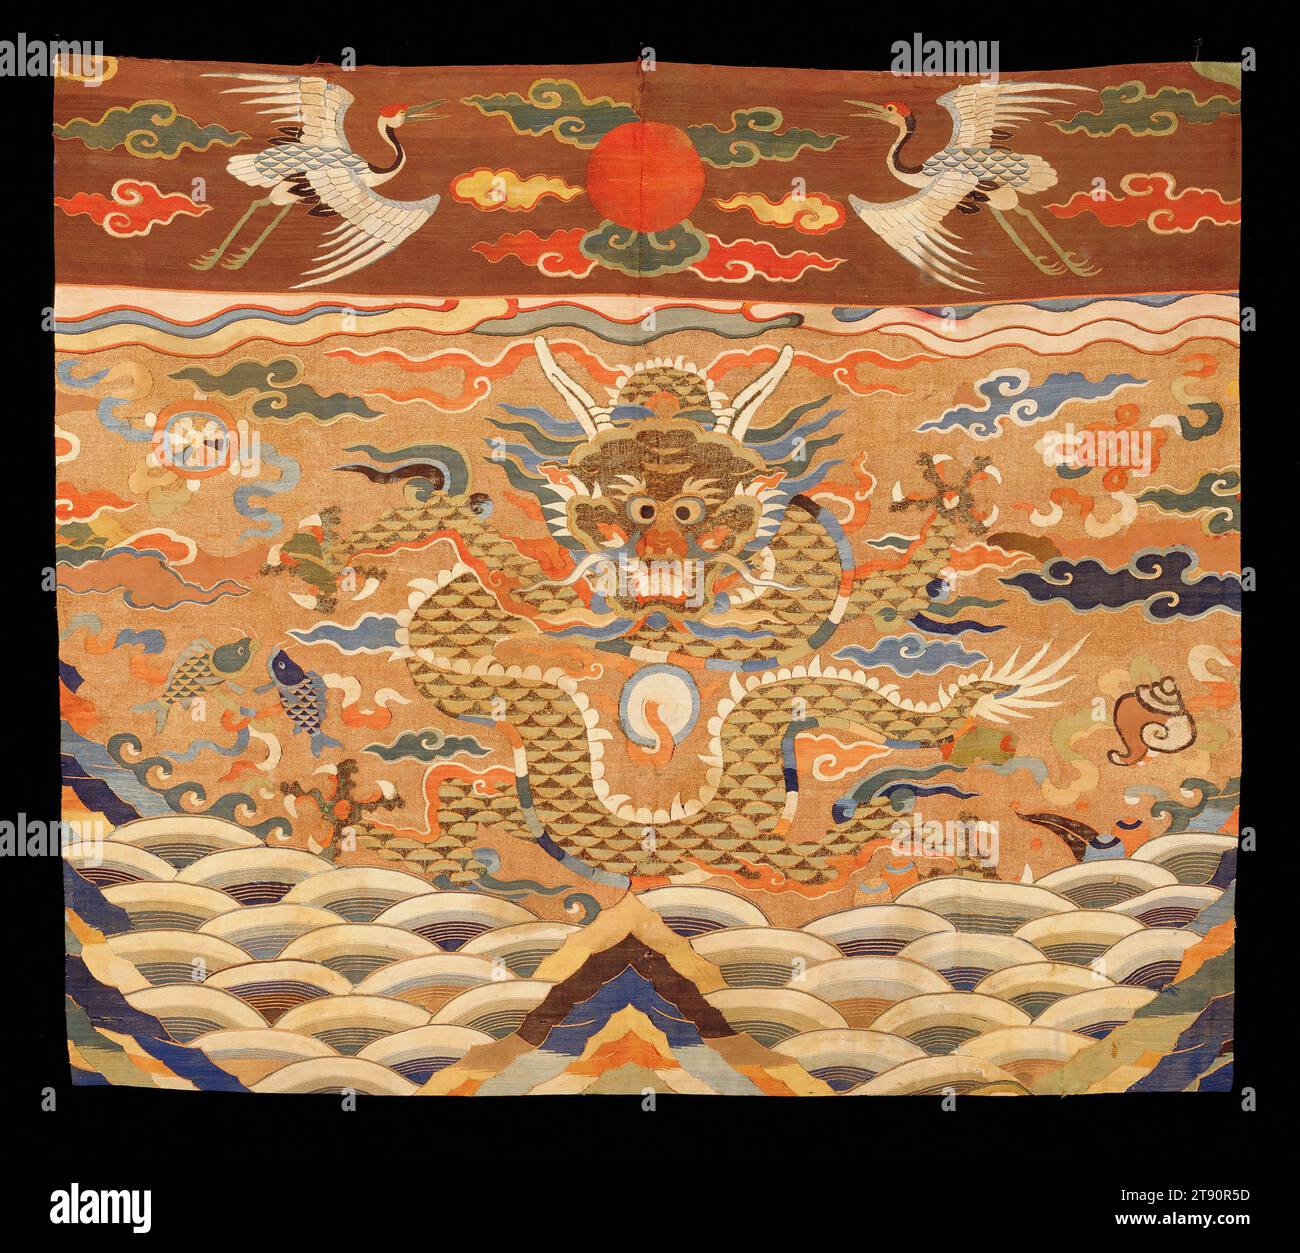 Altar Frontal, early 17th century, H. 33 ¼ in x W. 38 ¼ in. (83.82 x 96.52 cm), silk tapestry (kesi), China, 17th century, The upper section of this altar frontal depicts a sun disk flanked by Manchurian cranes in a field of clouds. The main section boasts a large dragon in a celestial landscape of clouds, mountains, and waves. Throughout the composition is a scattered scheme of the Eight Treasures of Buddhism, like the conch, the endless knot, the wheel of law, and the two golden fish Stock Photo